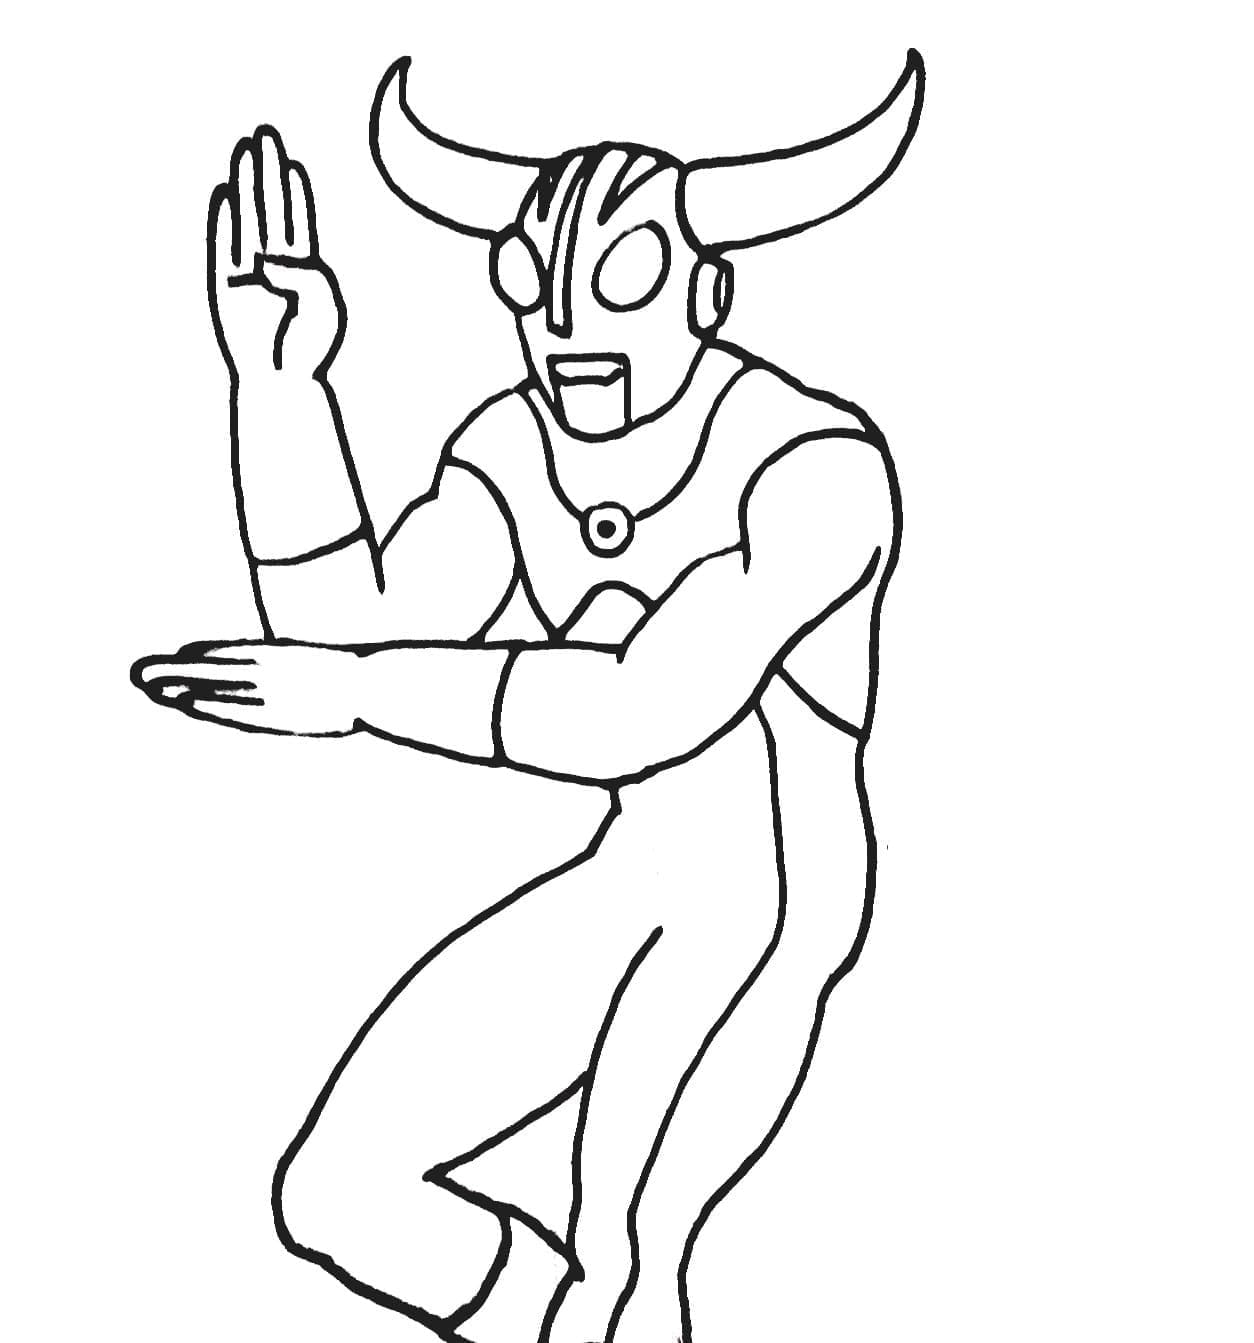 Ultraman Simple coloring page